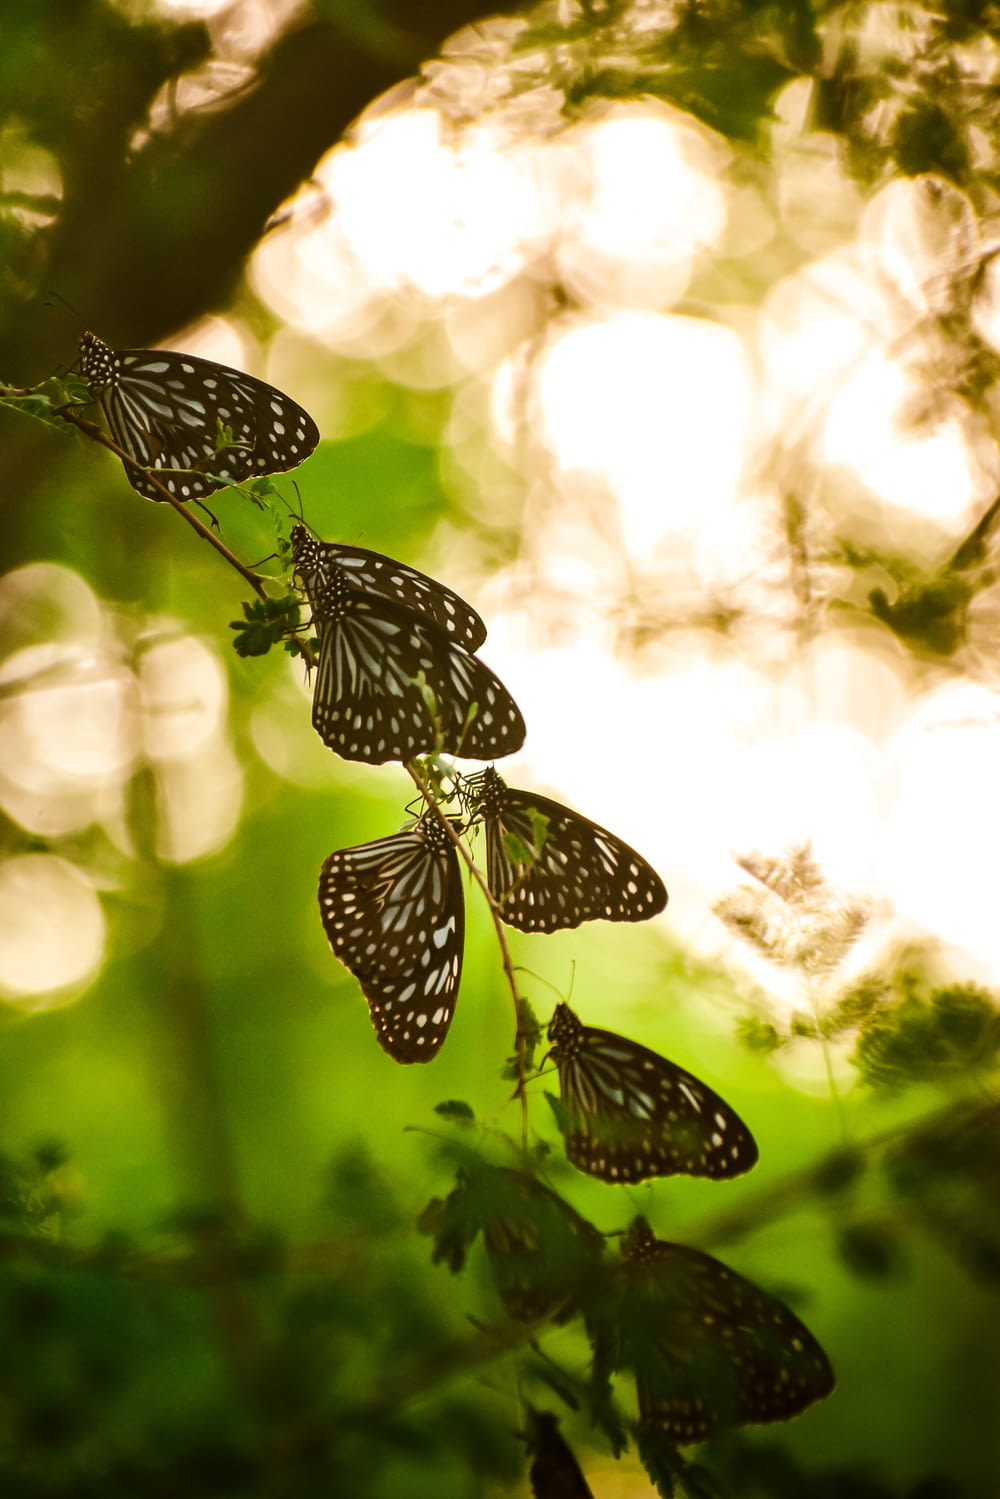 a group of butterflies hanging from a tree branch